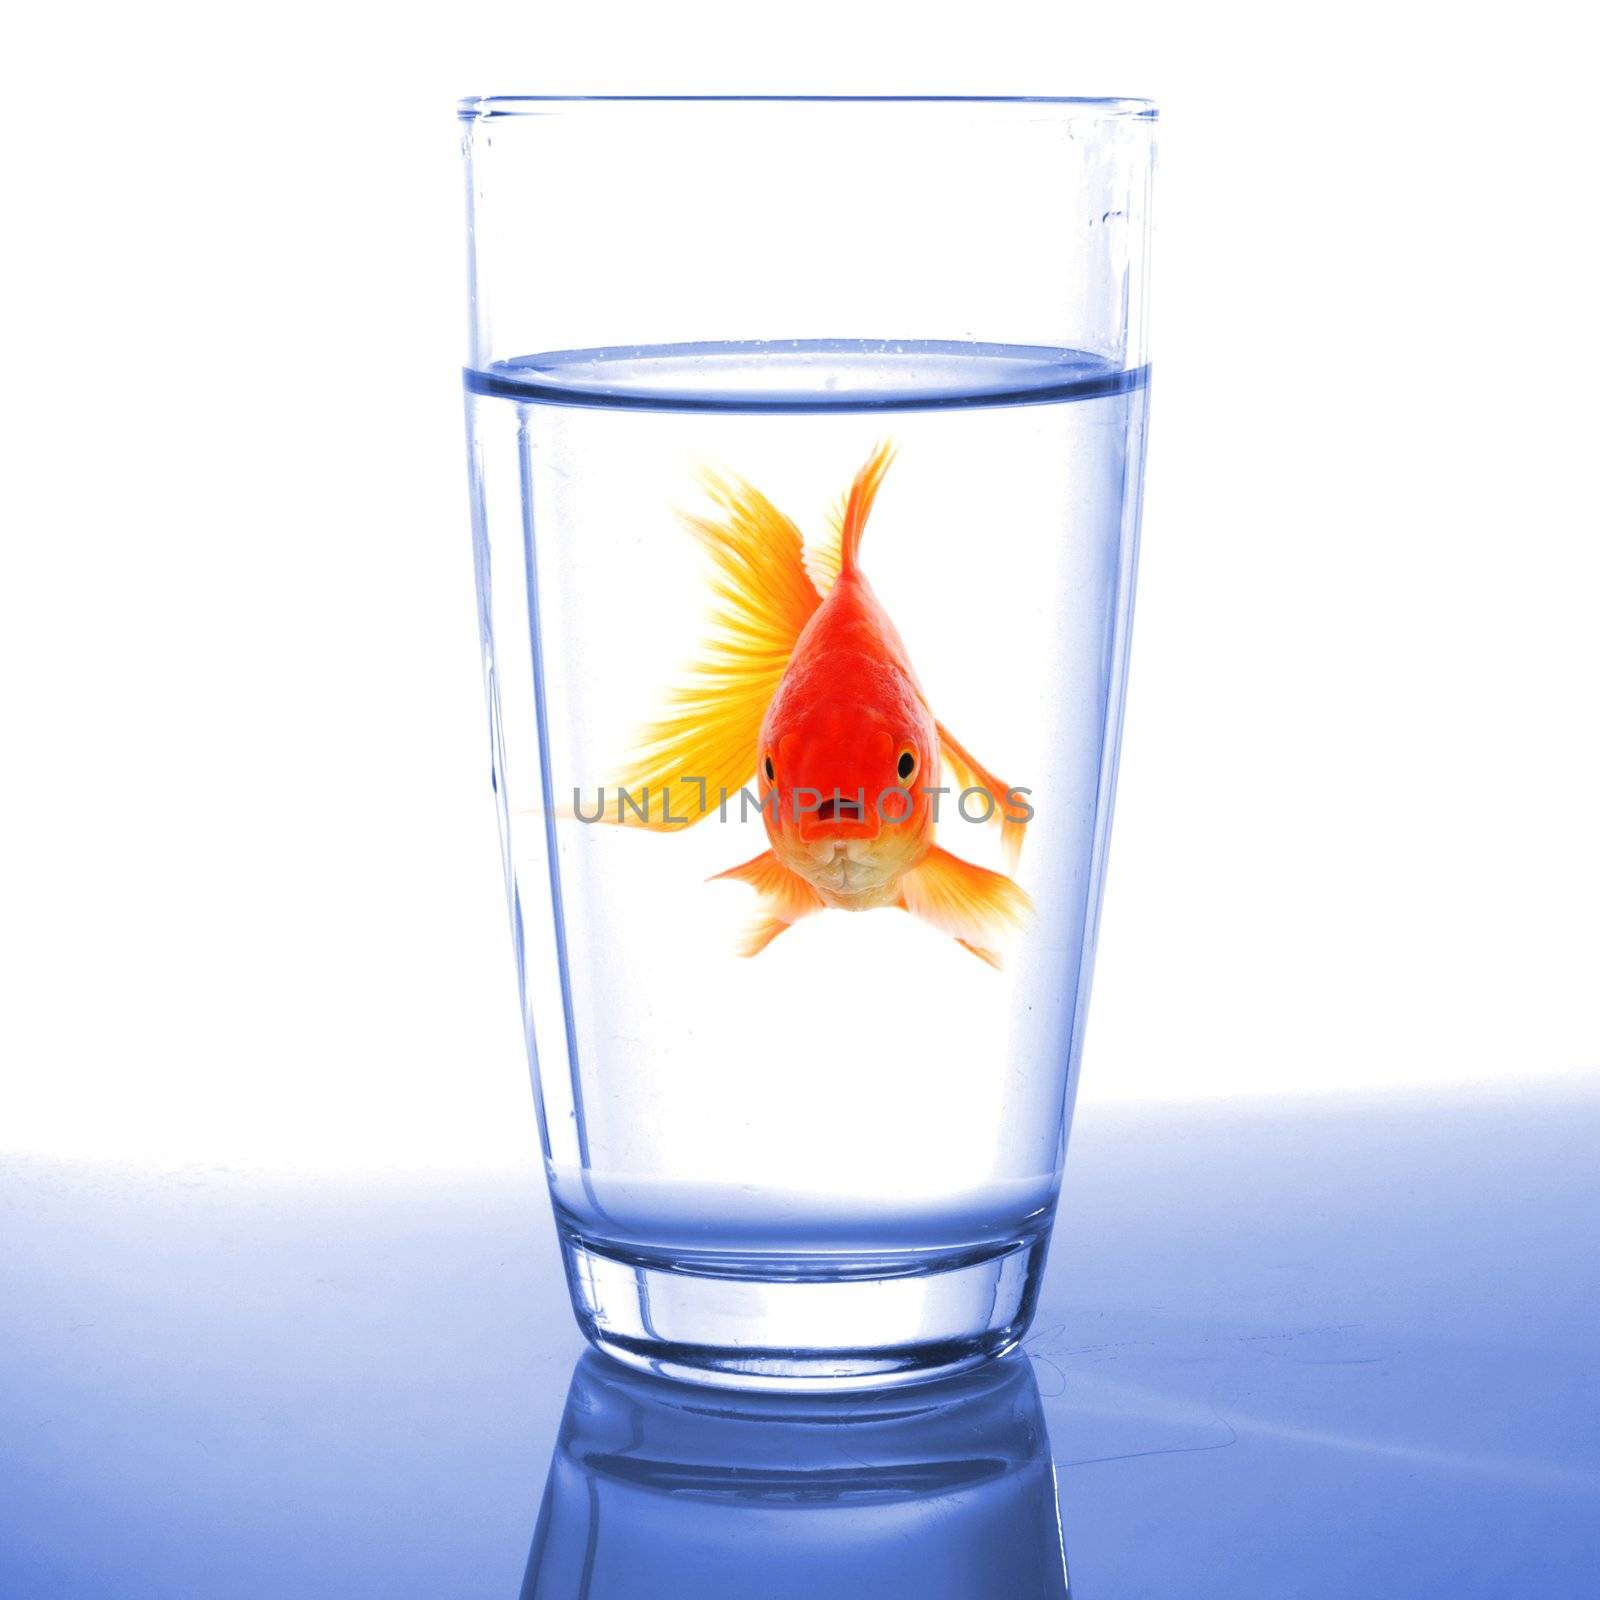 goldfish in glass of water showing challenge or creativity concept